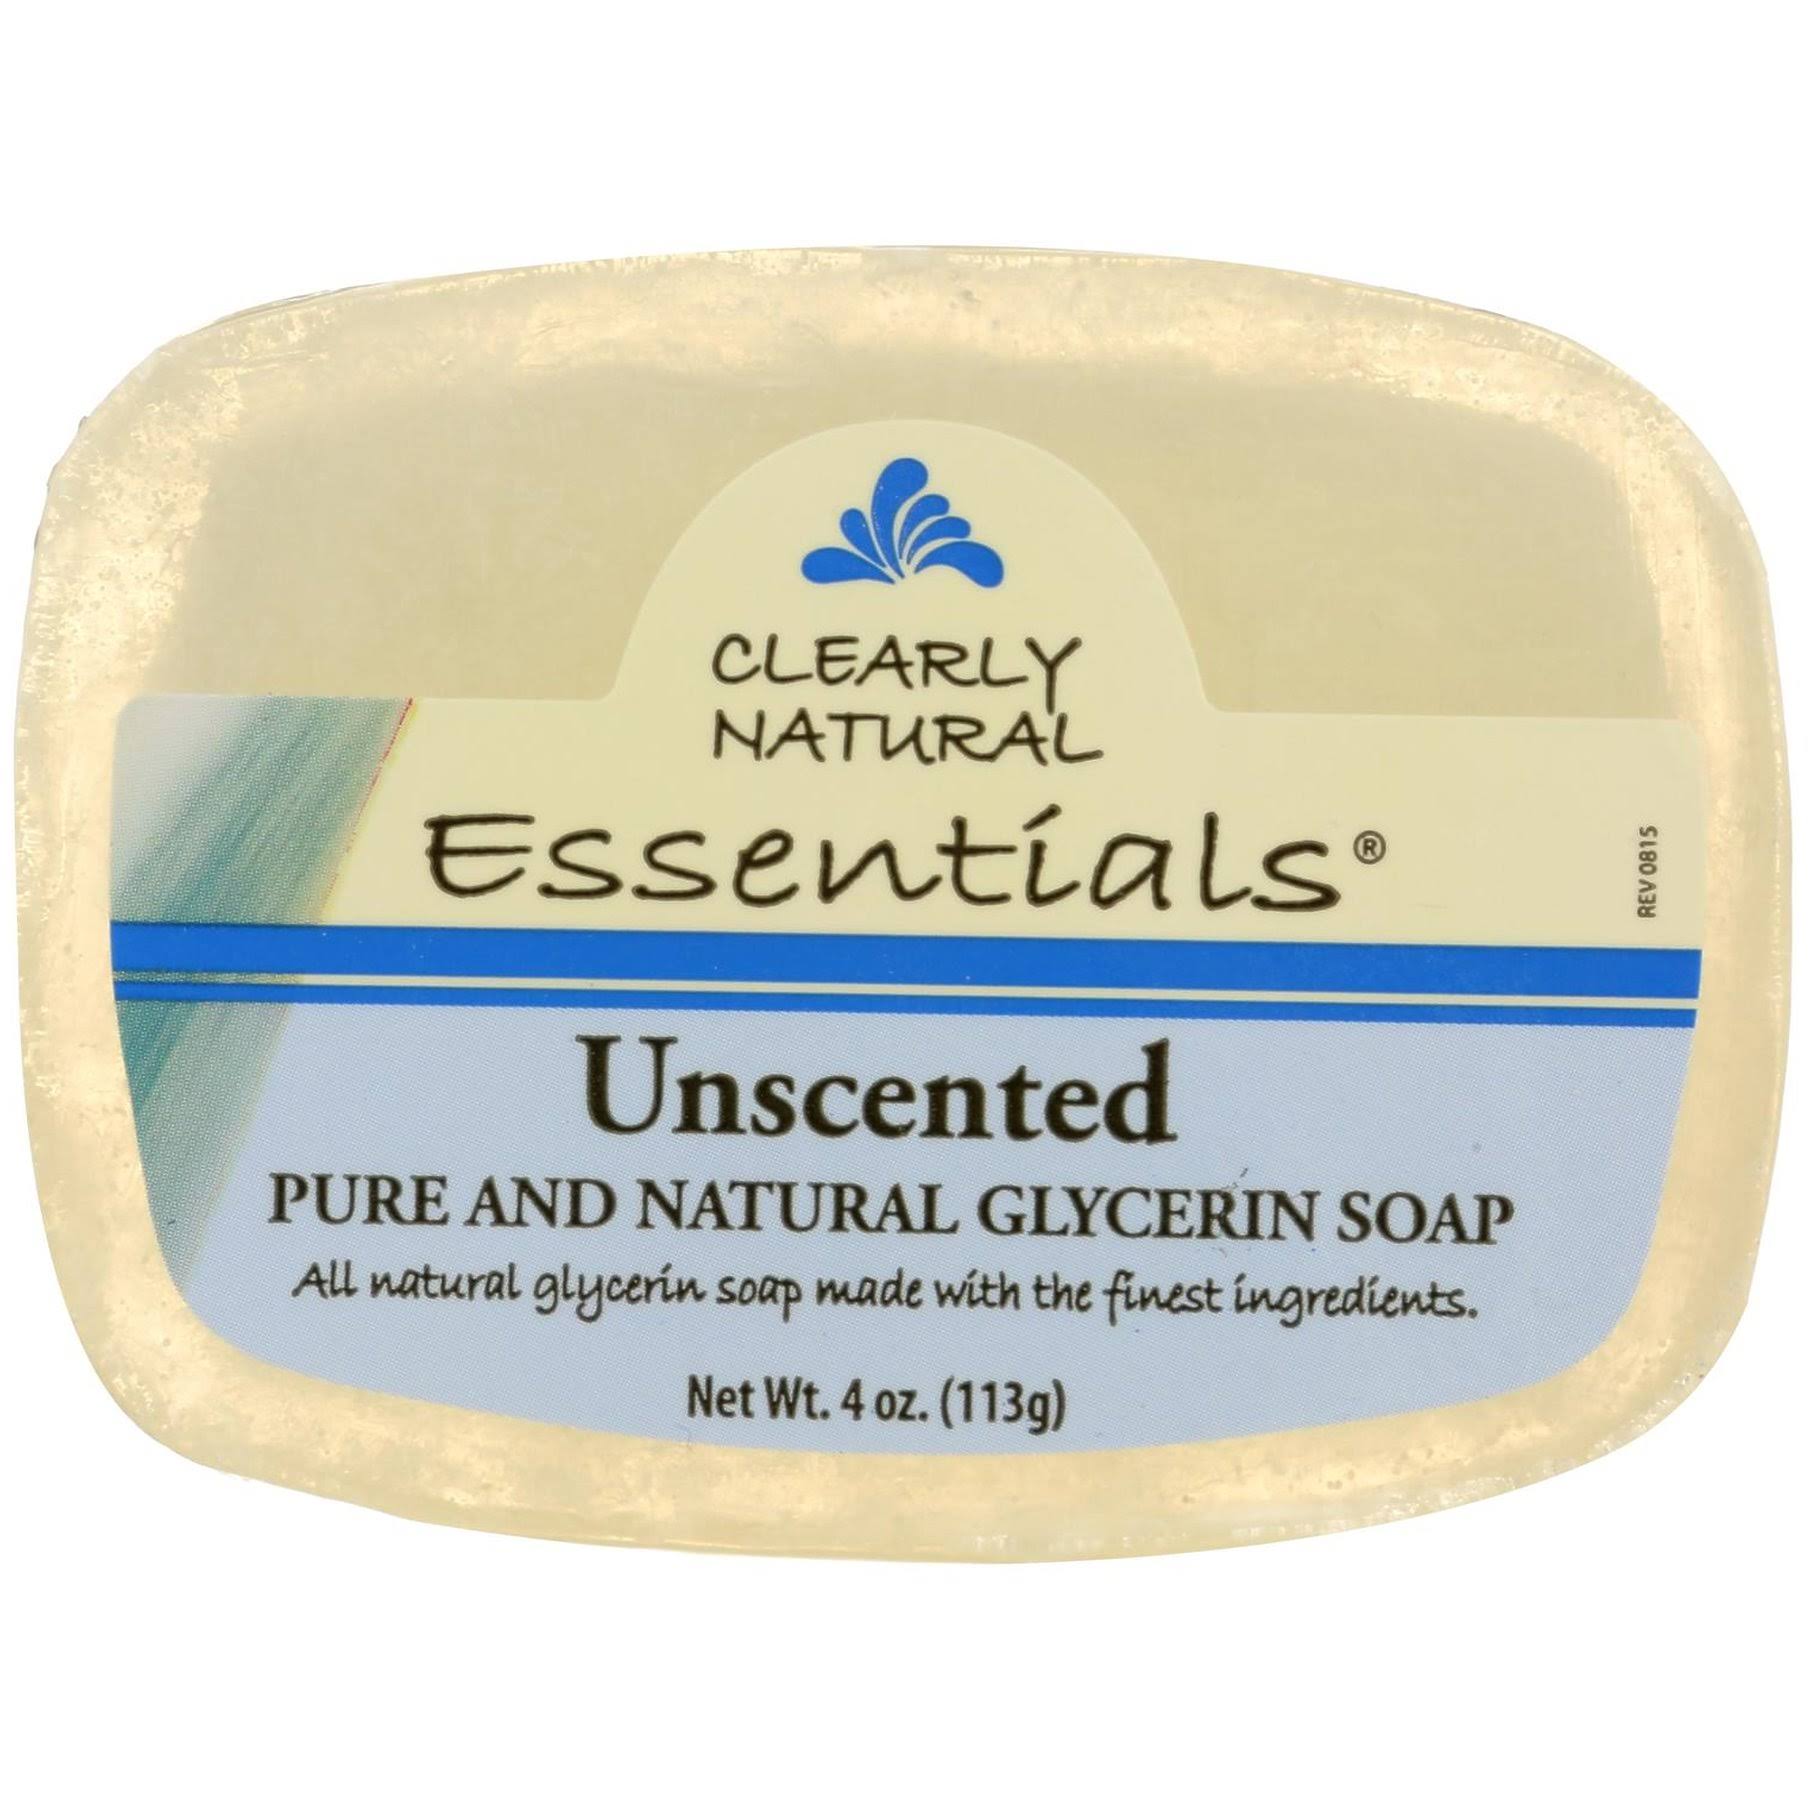 Clearly Natural Glycerine Soap - Unscented, 4 oz